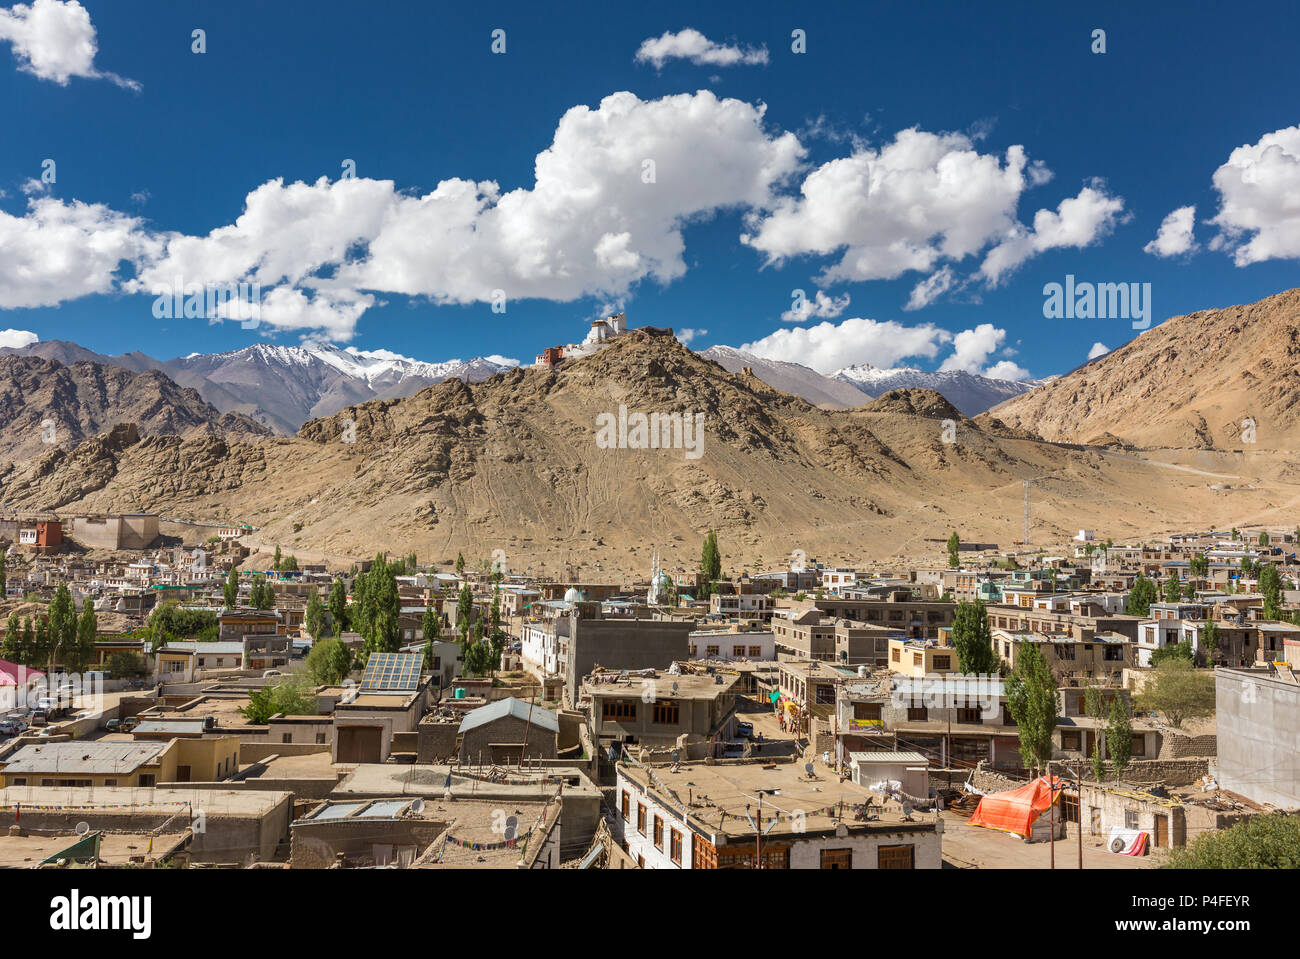 Beautiful view of Leh city with Tsemo Maitreya temple on the top of the hill, Jammu and Kashmir, India. Stock Photo